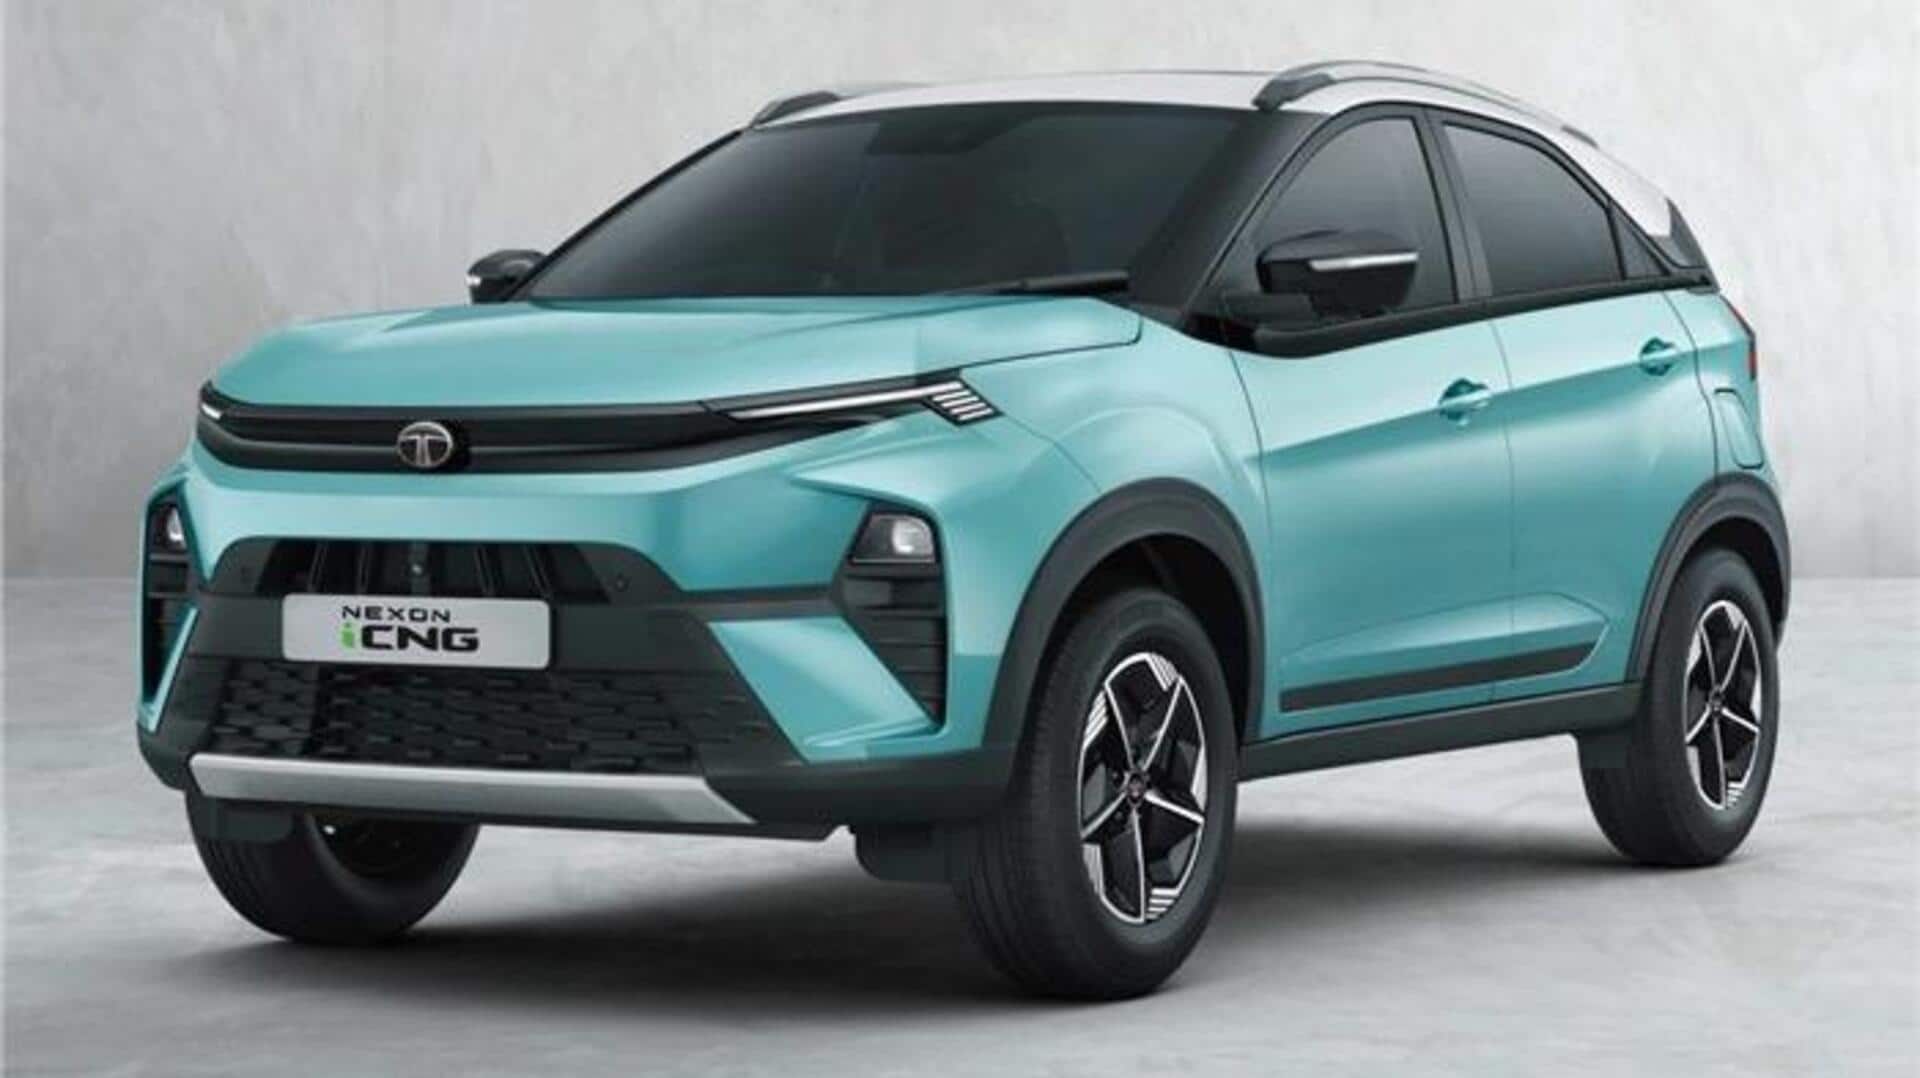 New Tata Nexon iCNG revealed ahead of its debut